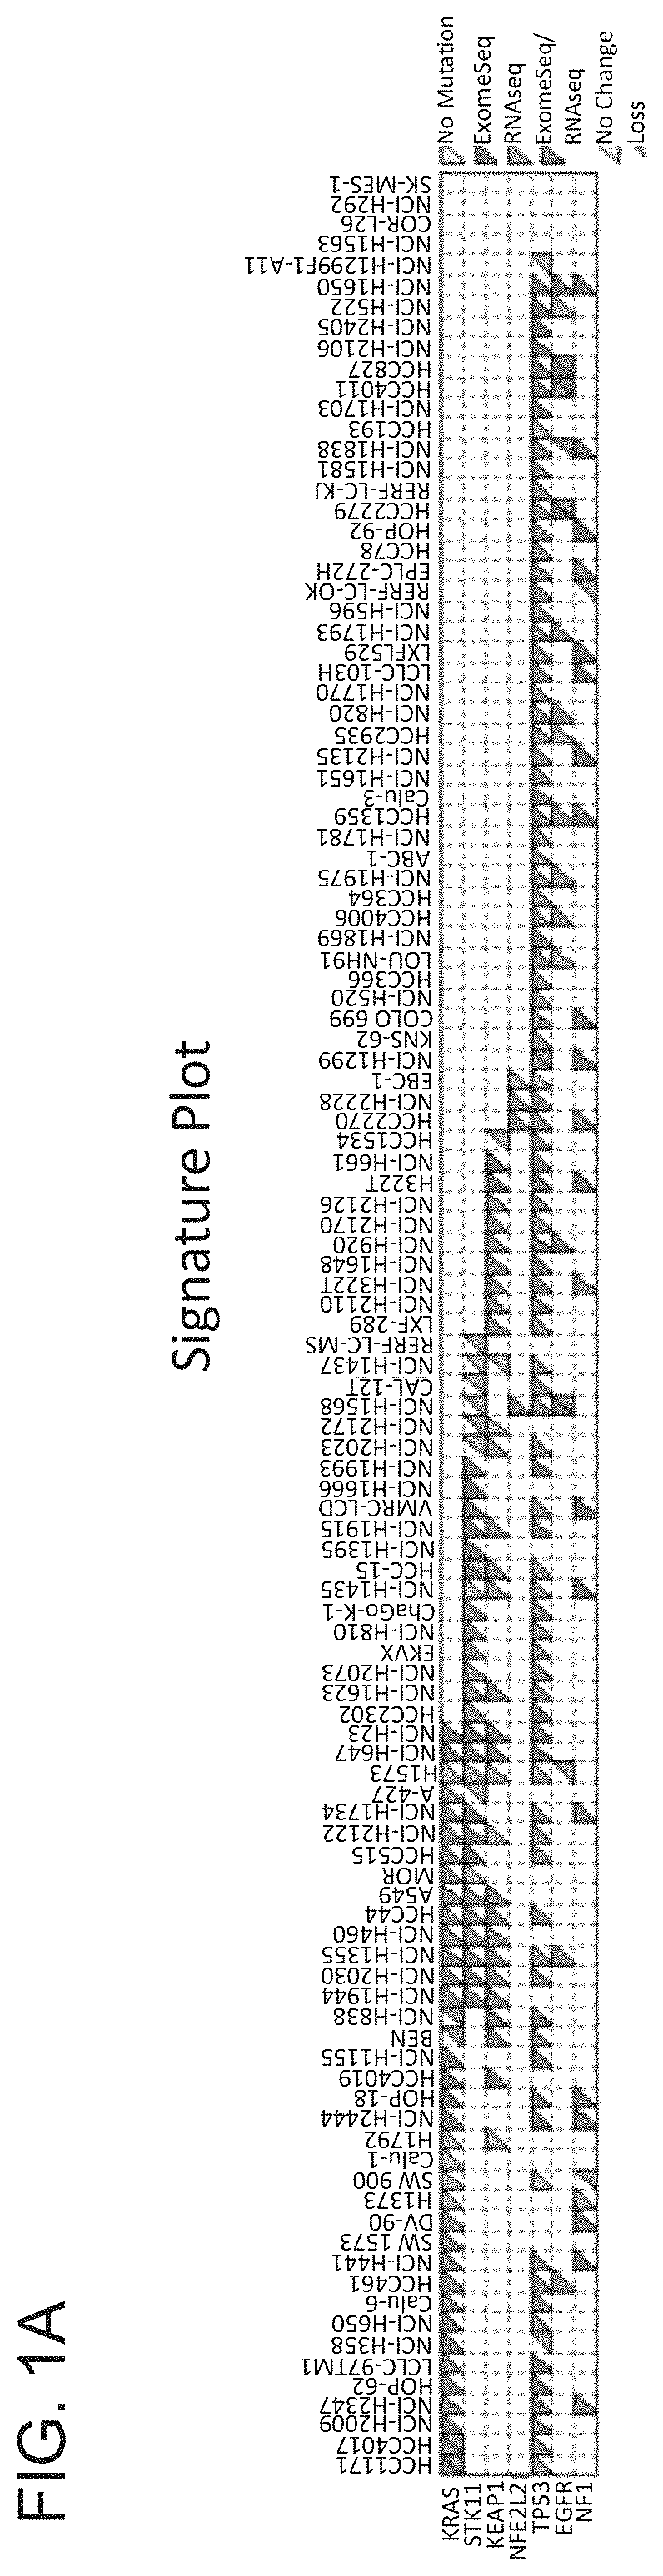 Methods for diagnosing and treating cancer by means of the expression status and mutational status of NRF2 and downstream target genes of said gene